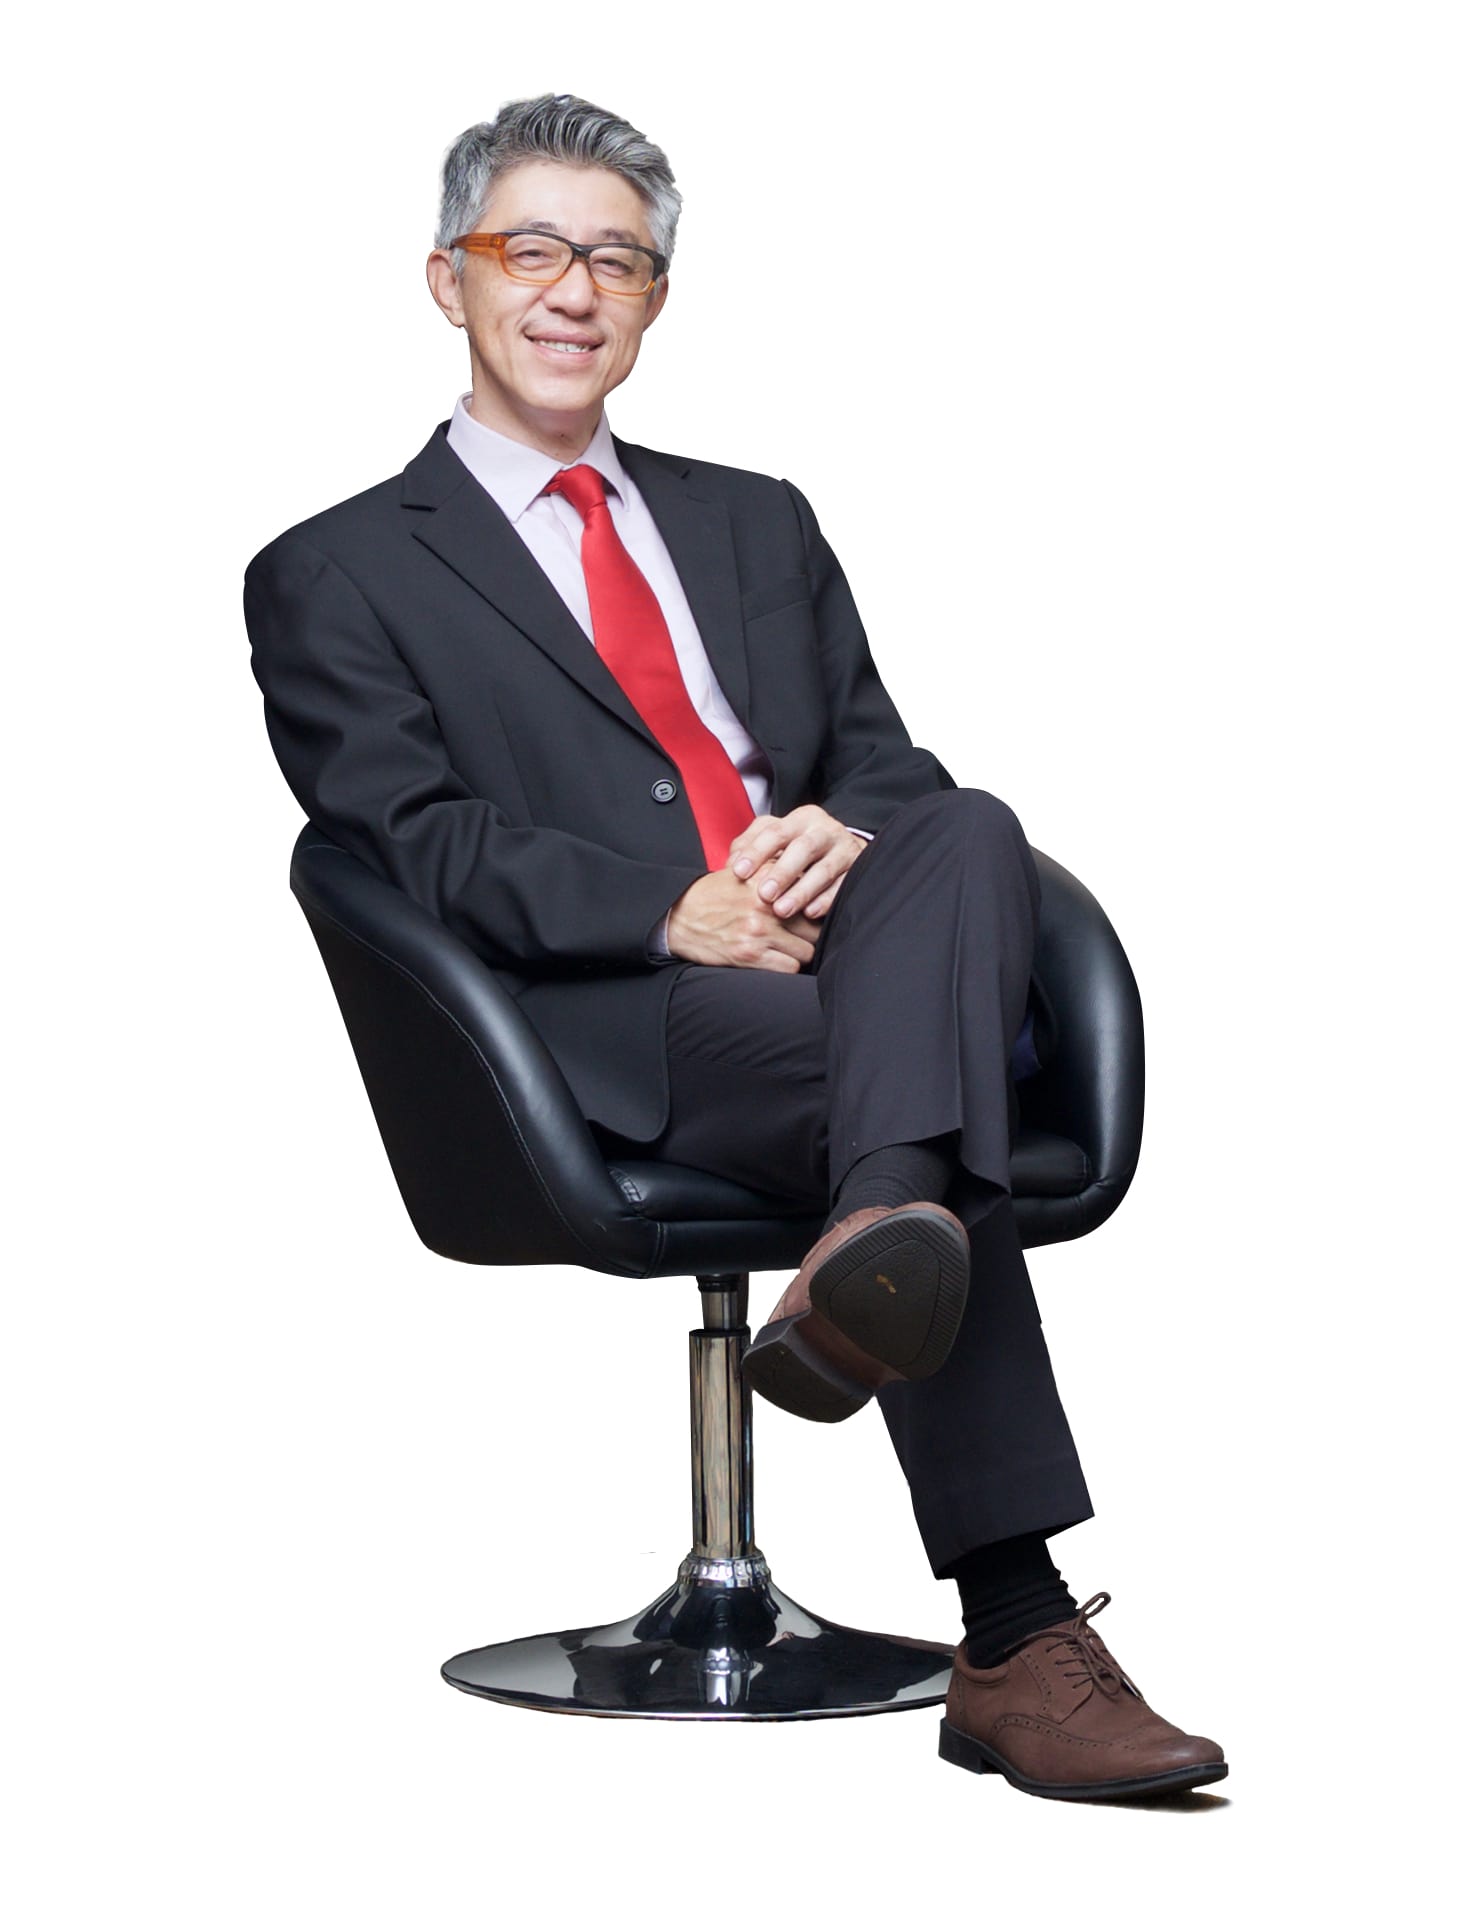 Executive chairman and ceo of bhglobal corporation ltd